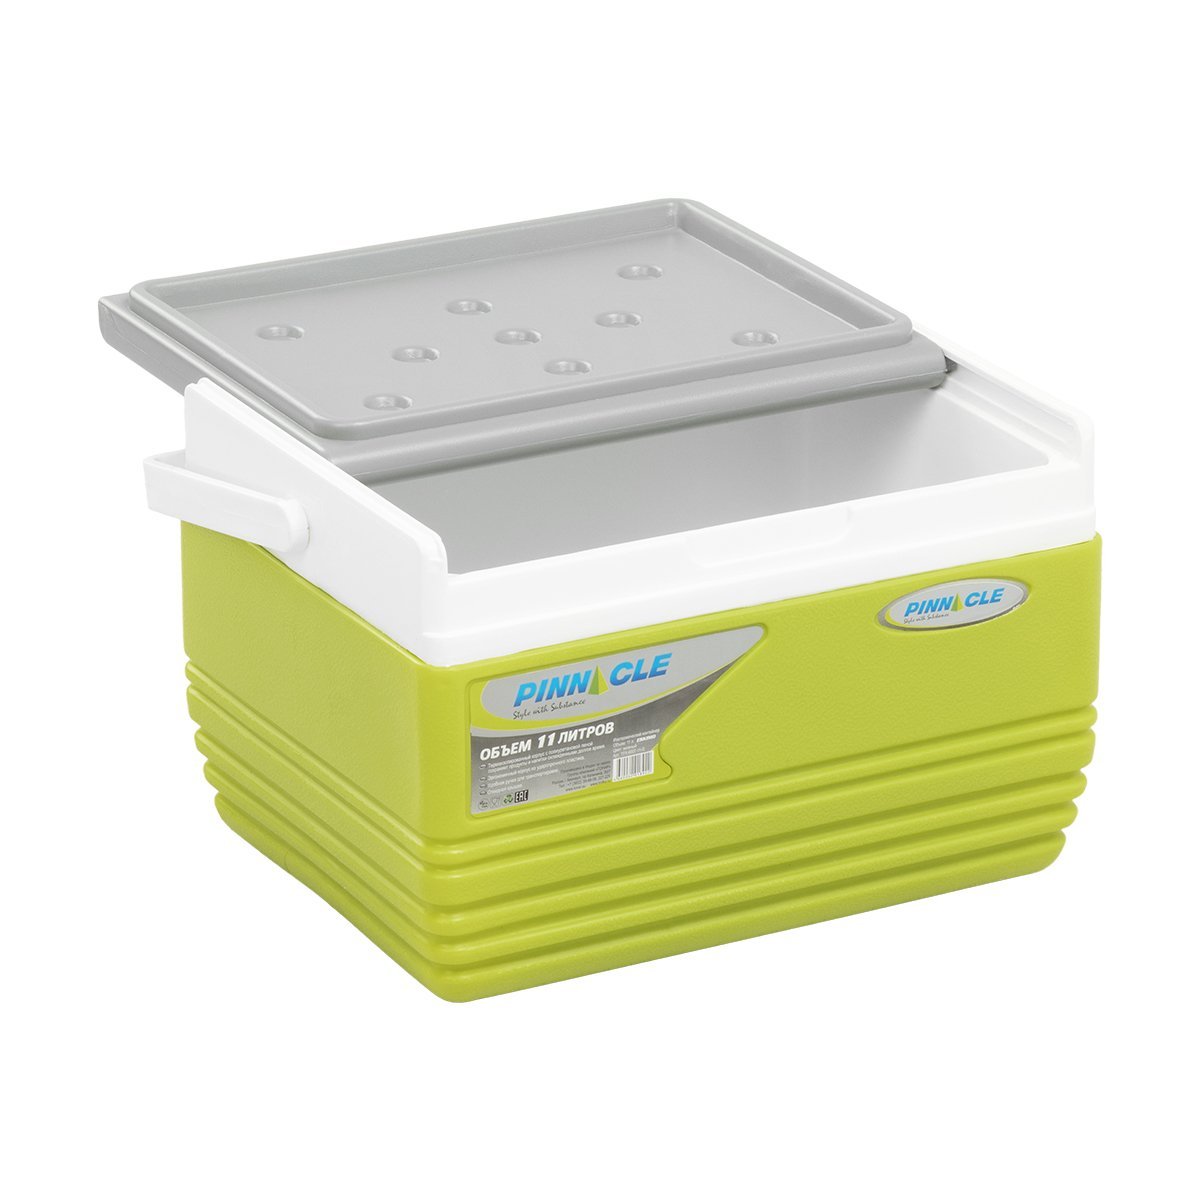 Eskimo Portable Hard-Sided Ice Chest for Camping, 11 qt, Green with a lid half opened